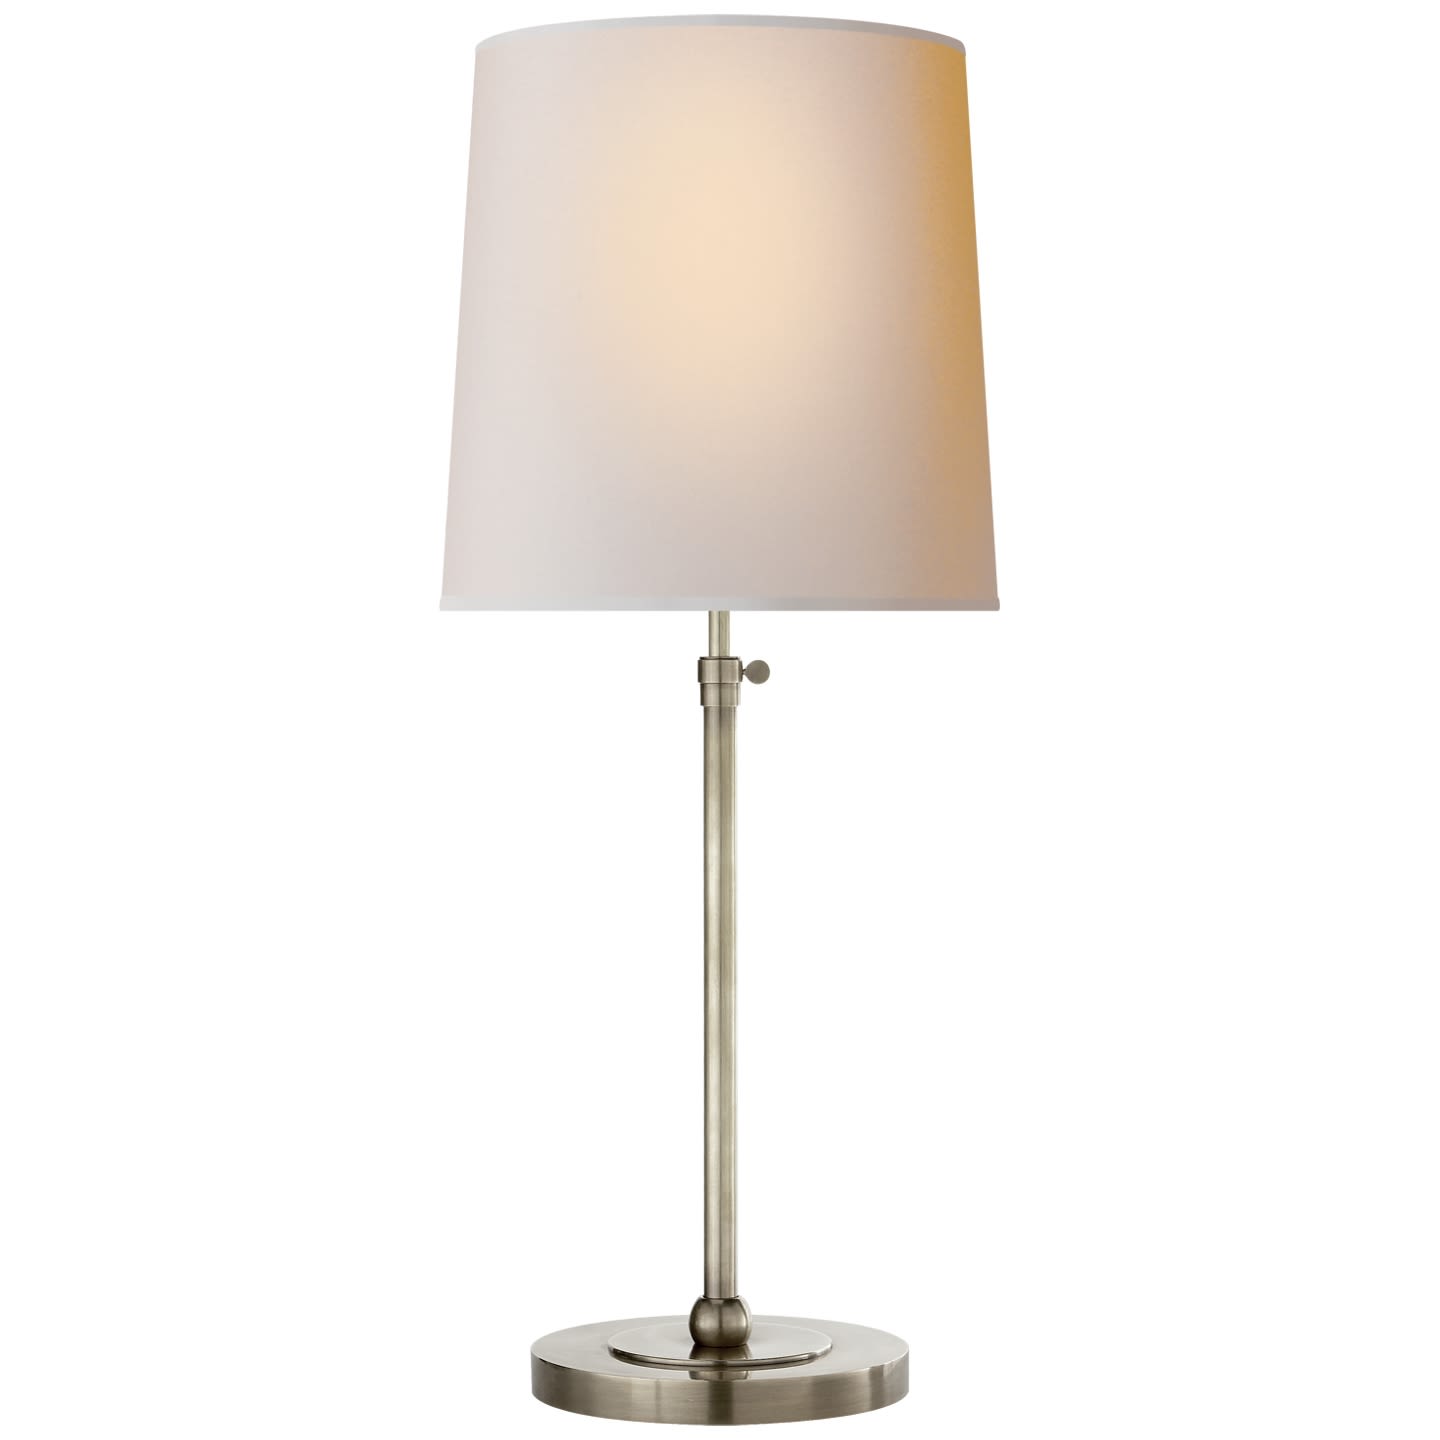 Visual Comfort Bryant Modern Antique Brass Linen Shade Table Lamp - Small  Tall (28 - 32 H)